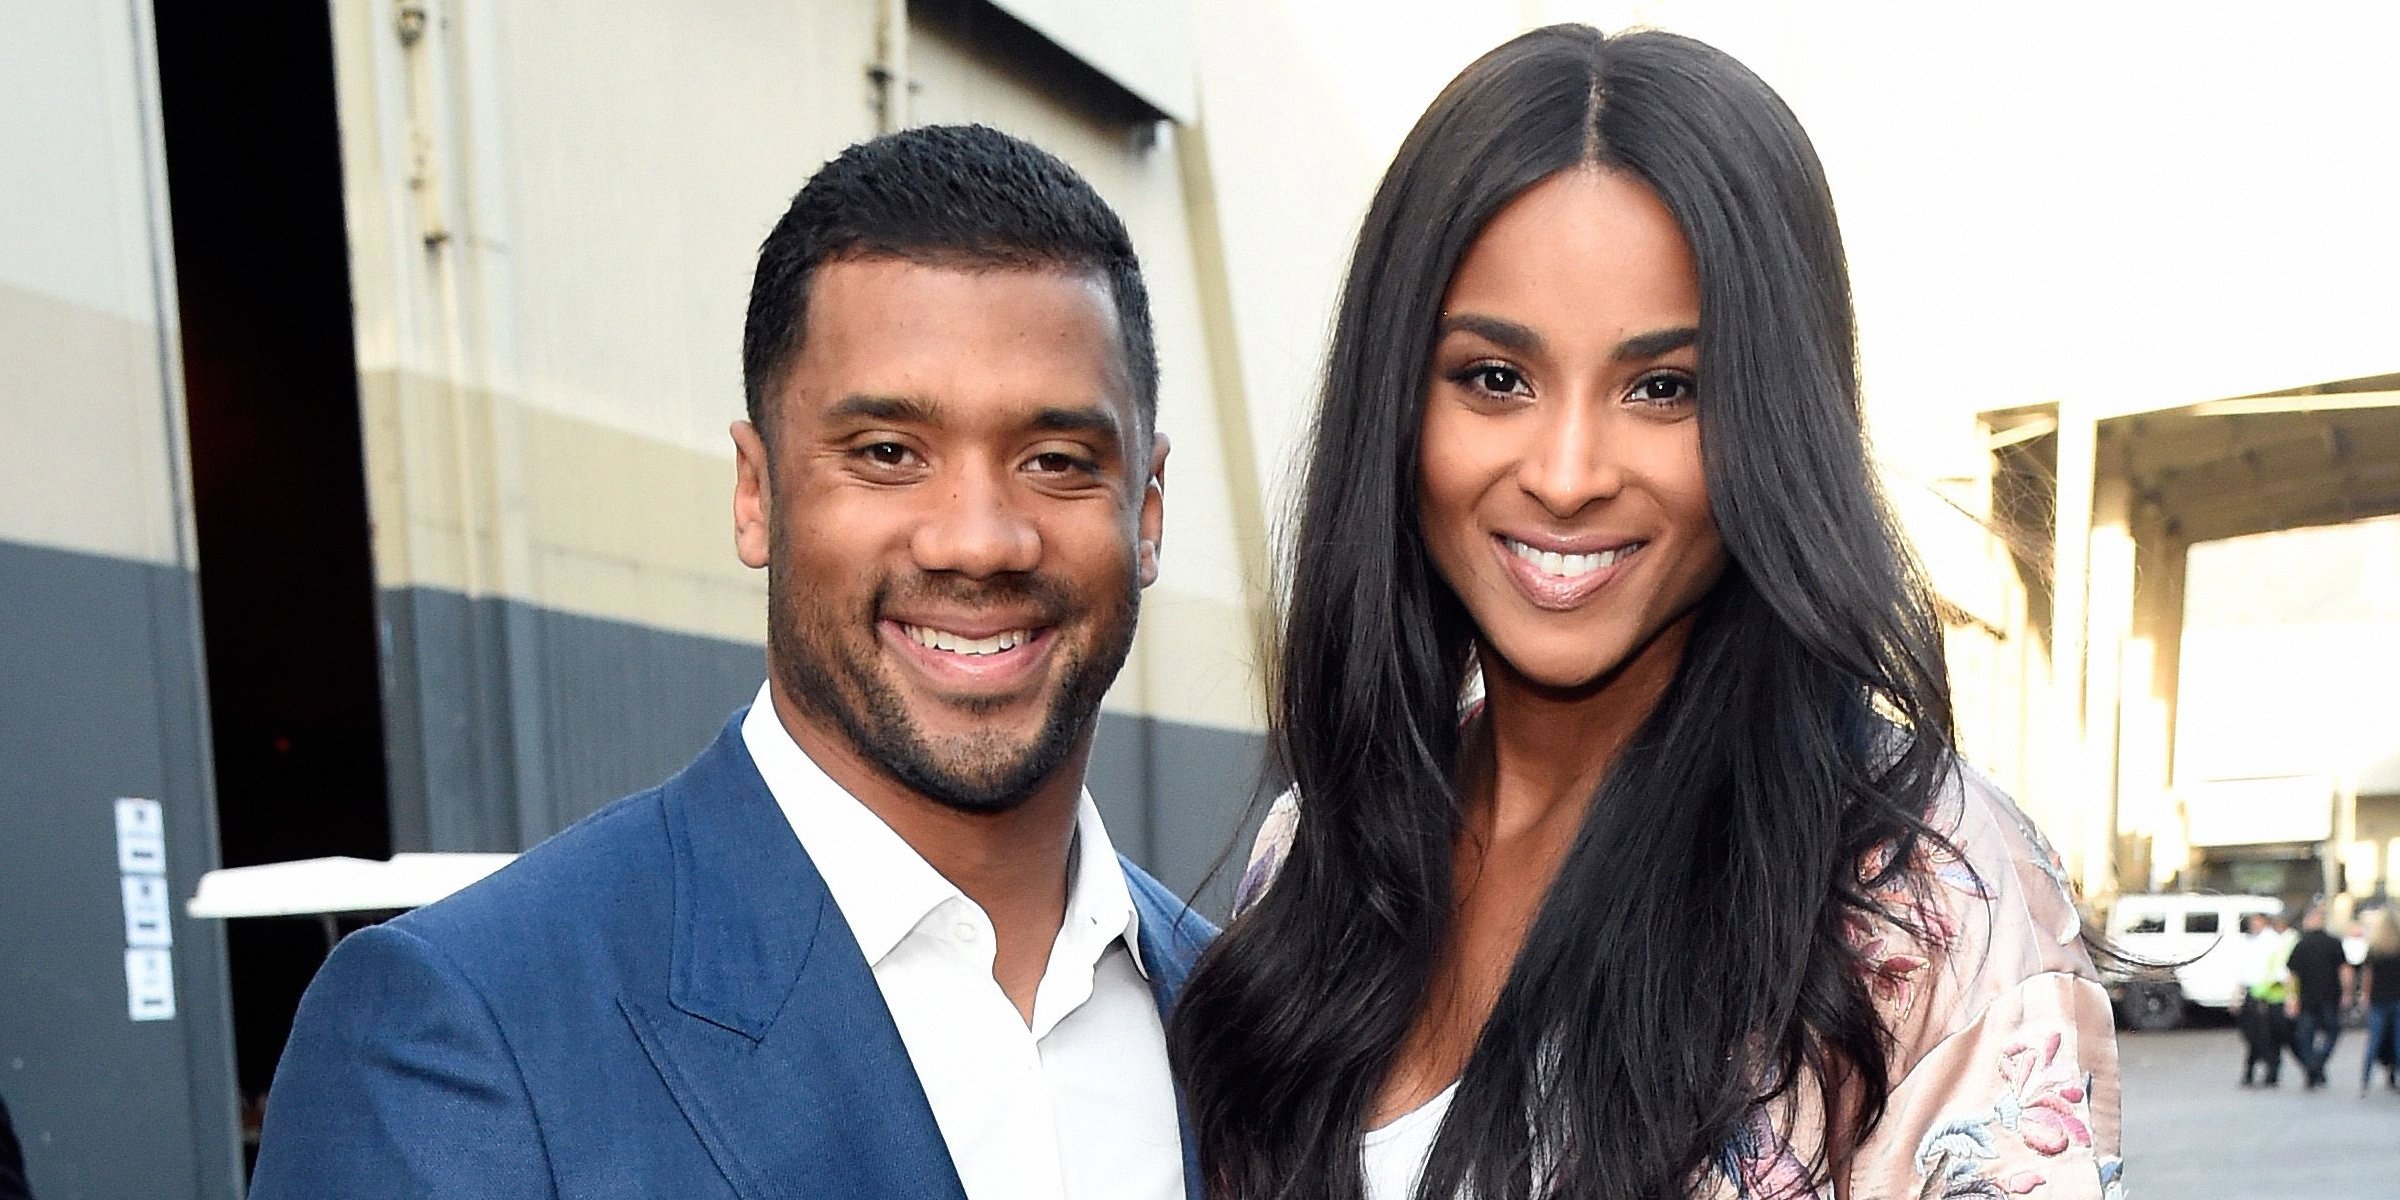 Russell Wilson with wife, Ciara. | Source: Getty Images